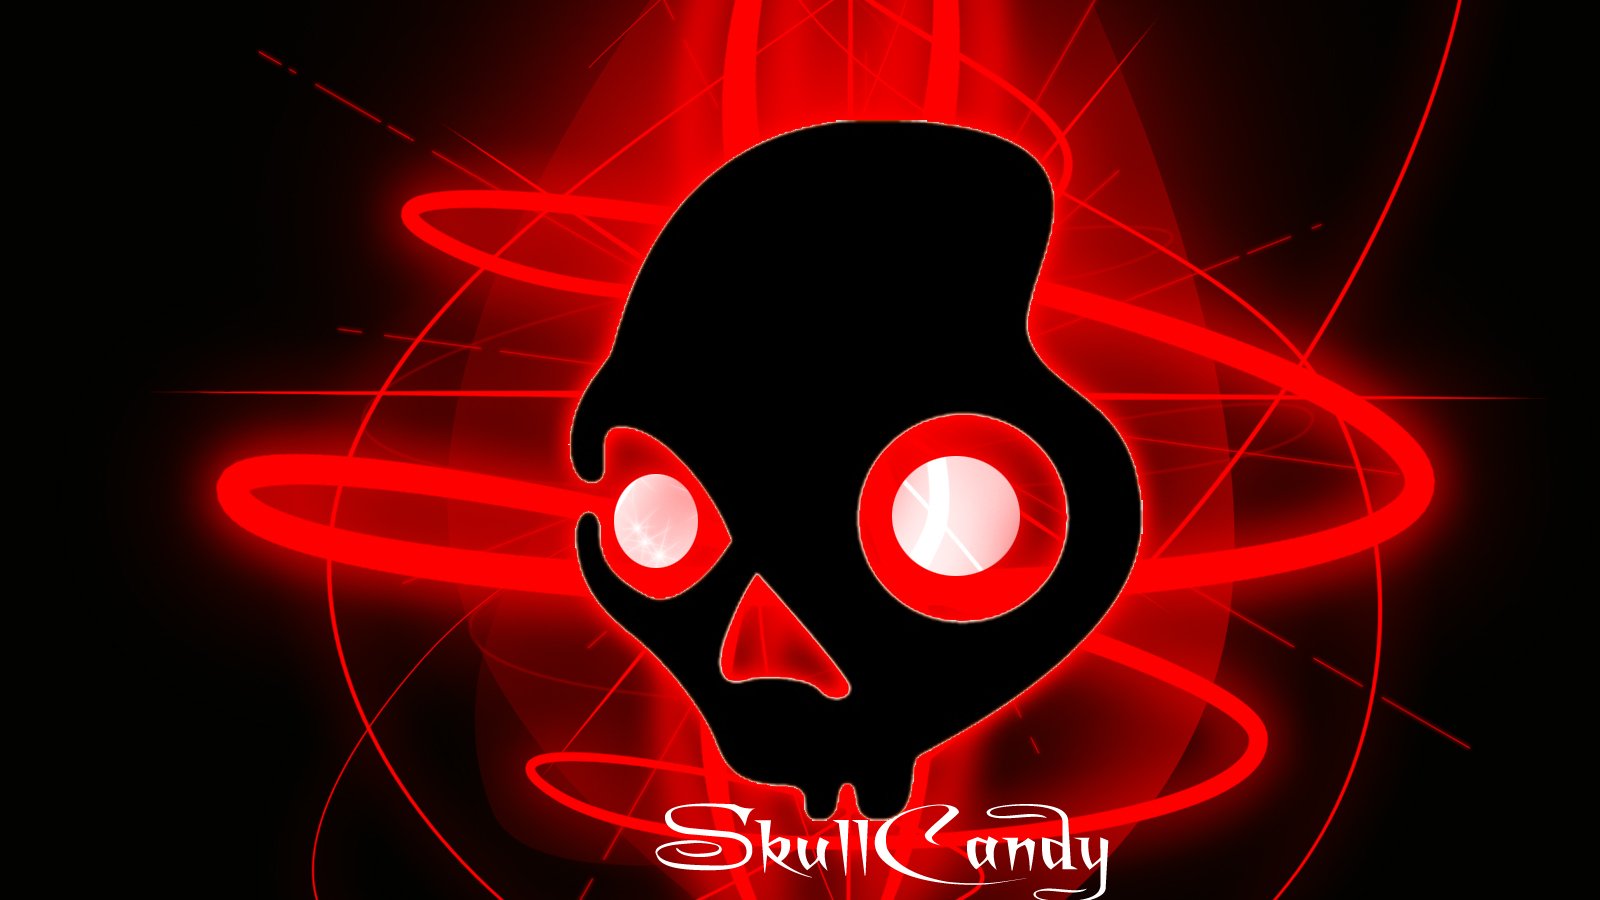 Skullcandy Wallpaper submited images